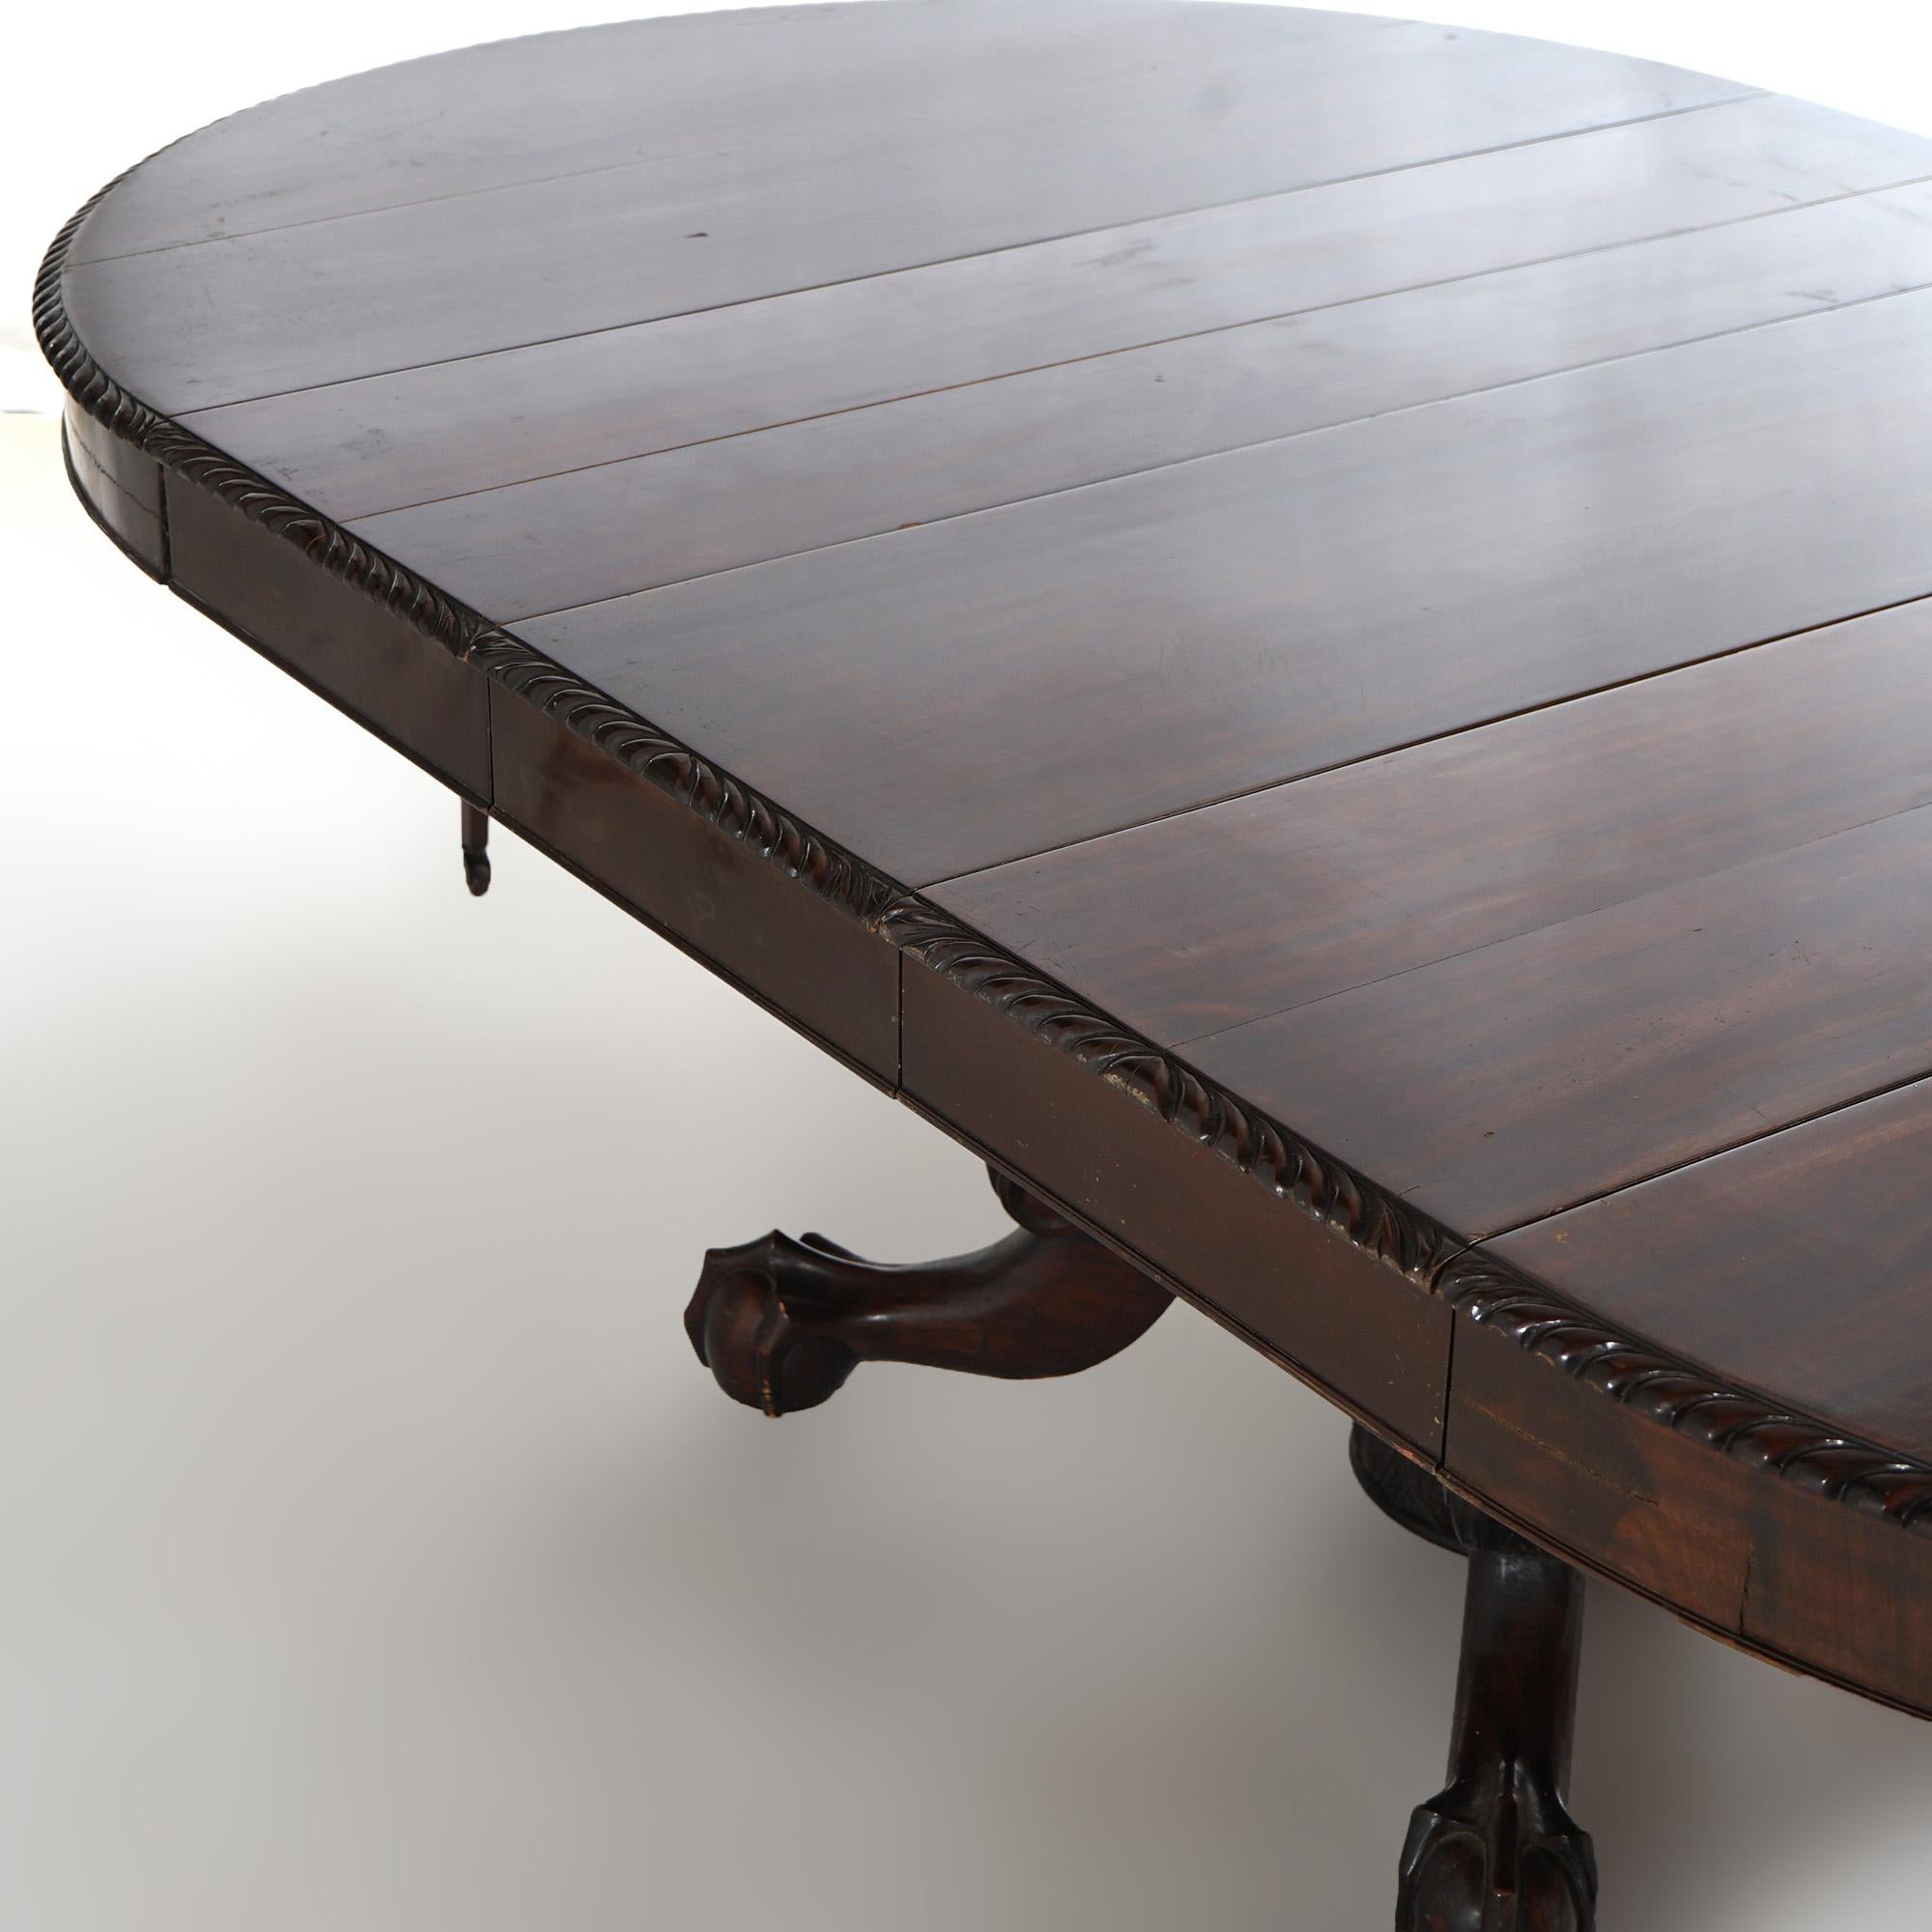 Antique Neoclassical Empire Carved Flame Mahogany 60” Dining Table & Four Leaves For Sale 12